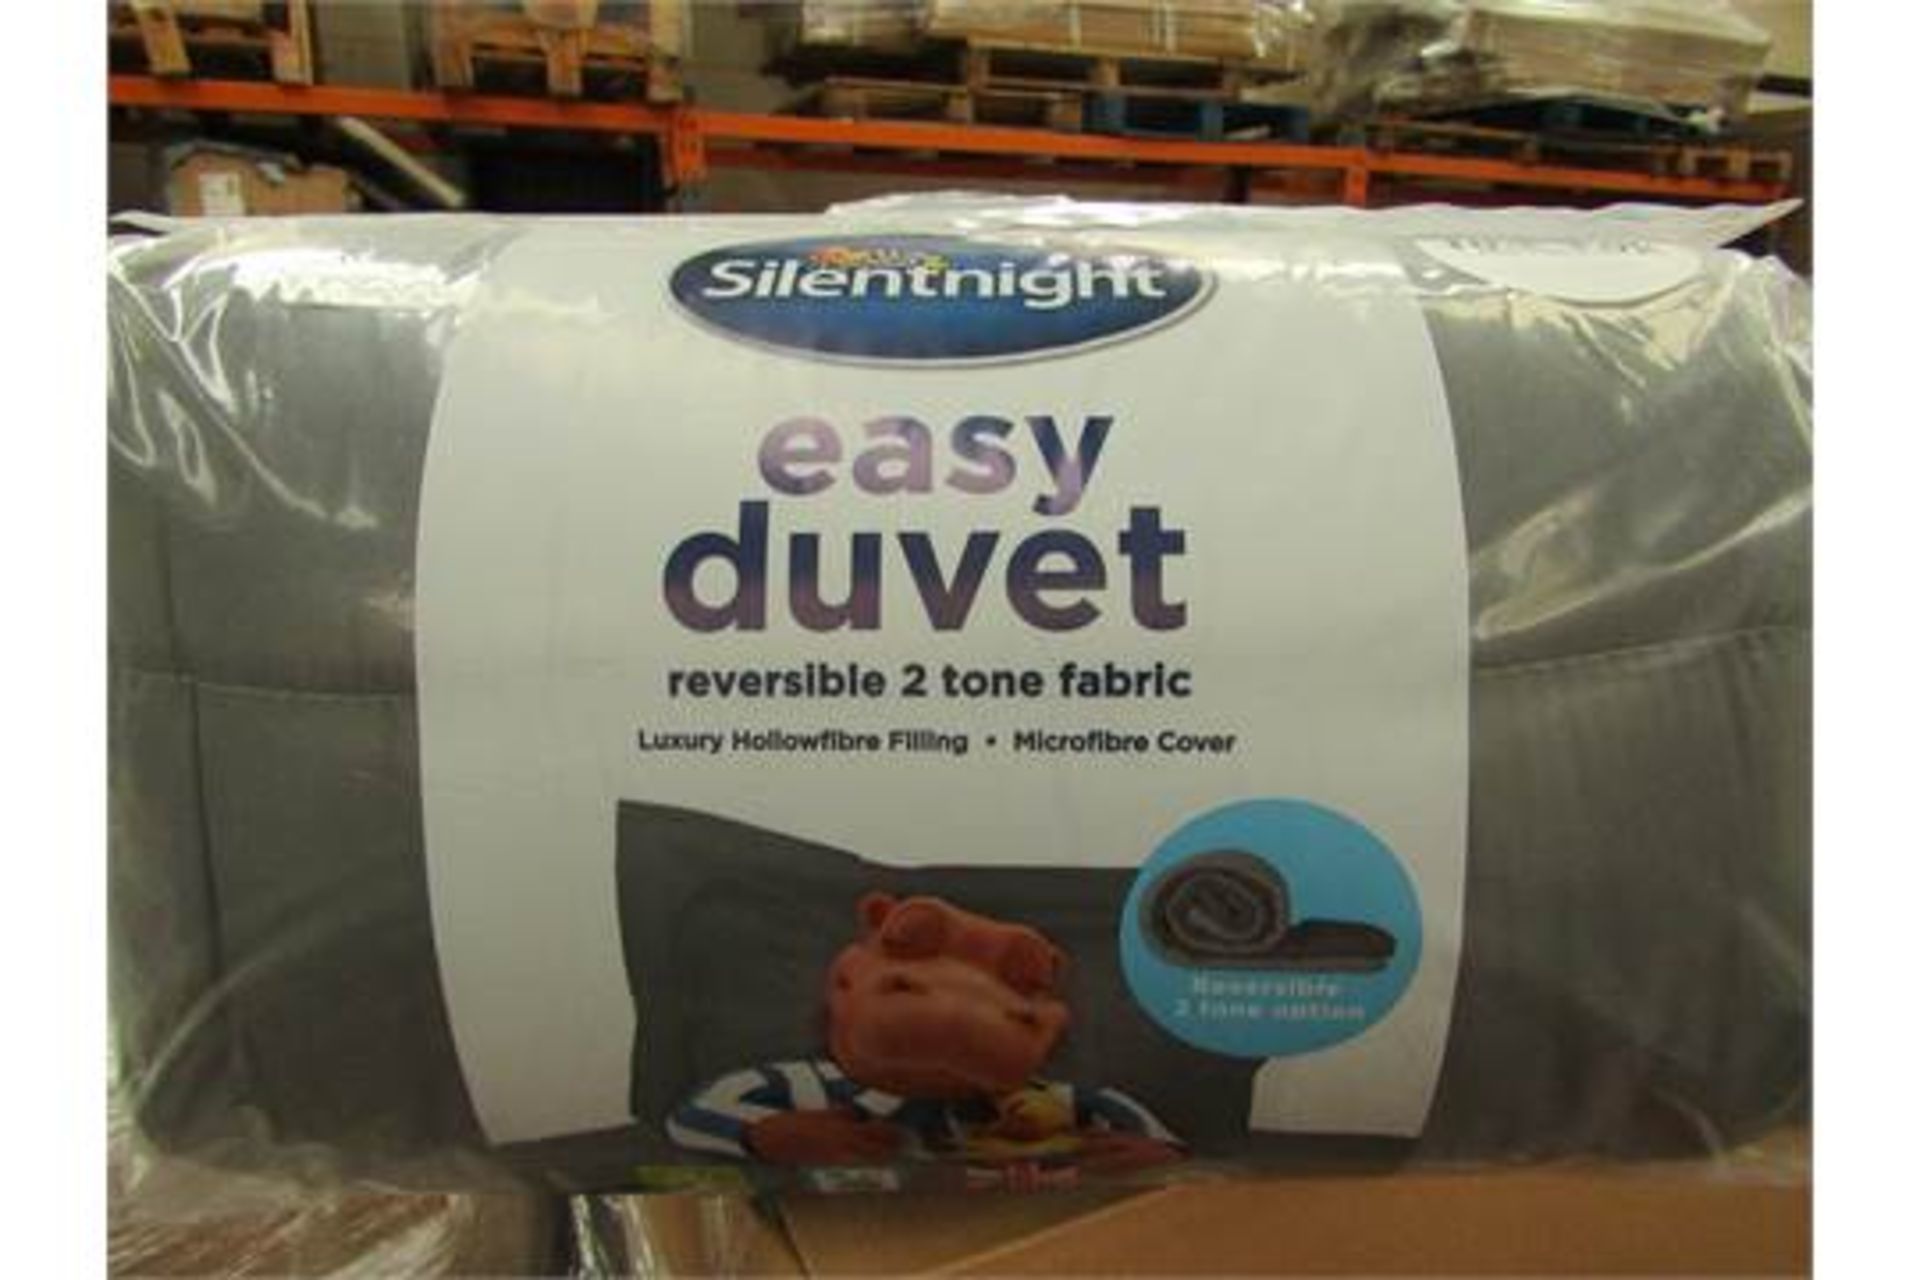 5x Silentnight easy duvet, reversible 2 tone fabric, 10.5Tog Double size, new in packaging.